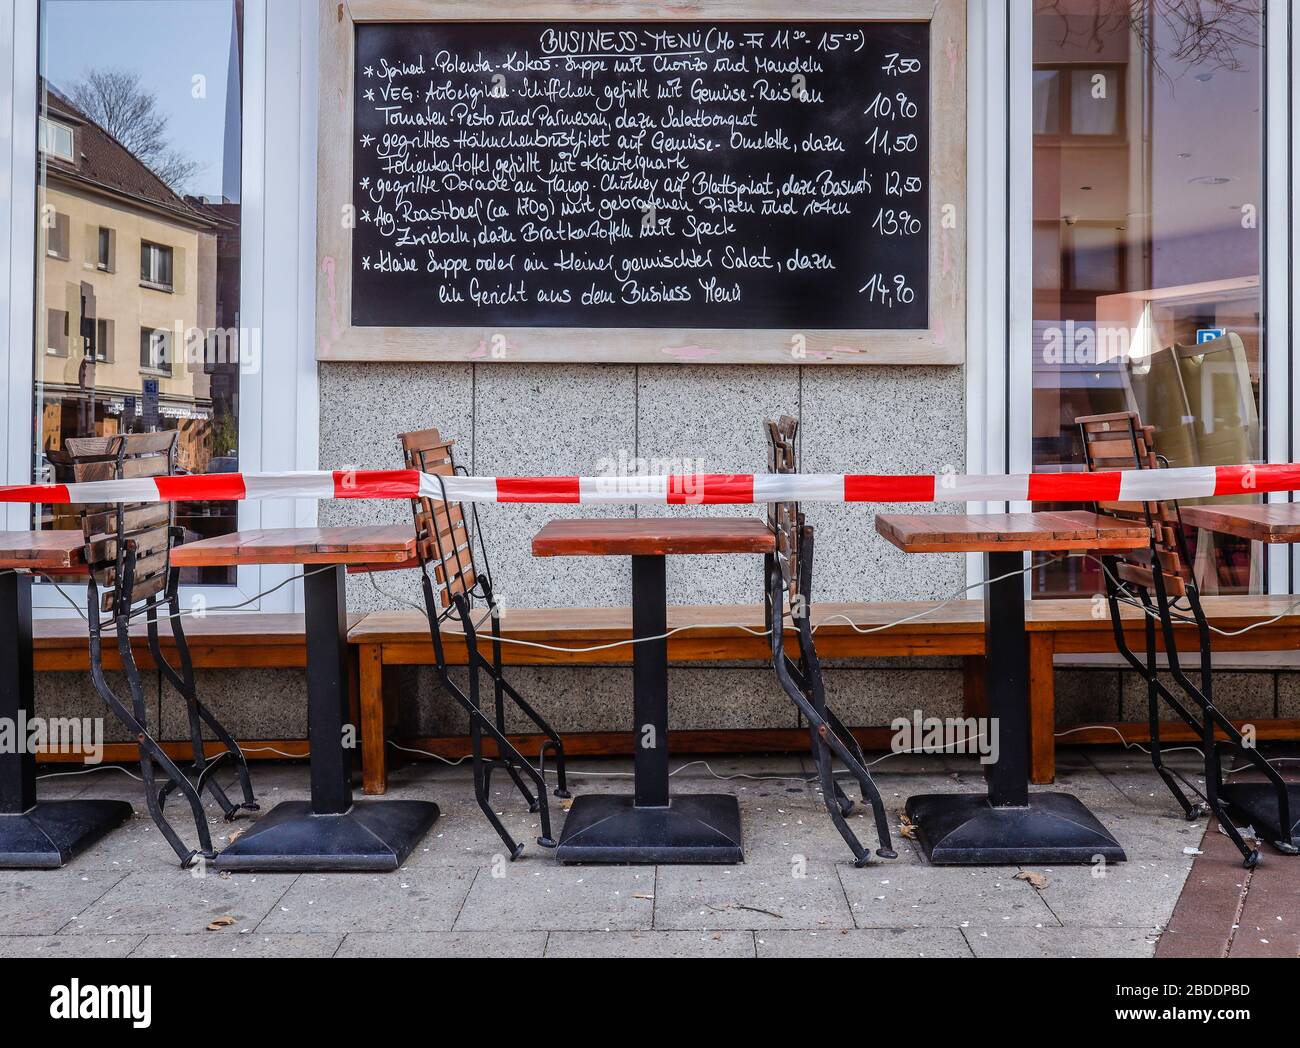 27.03.2020, Essen, North Rhine-Westphalia, Germany - Coronakrise, closed shops and restaurants on Ruettenscheider Strasse, here the Cafe Zucca with re Stock Photo